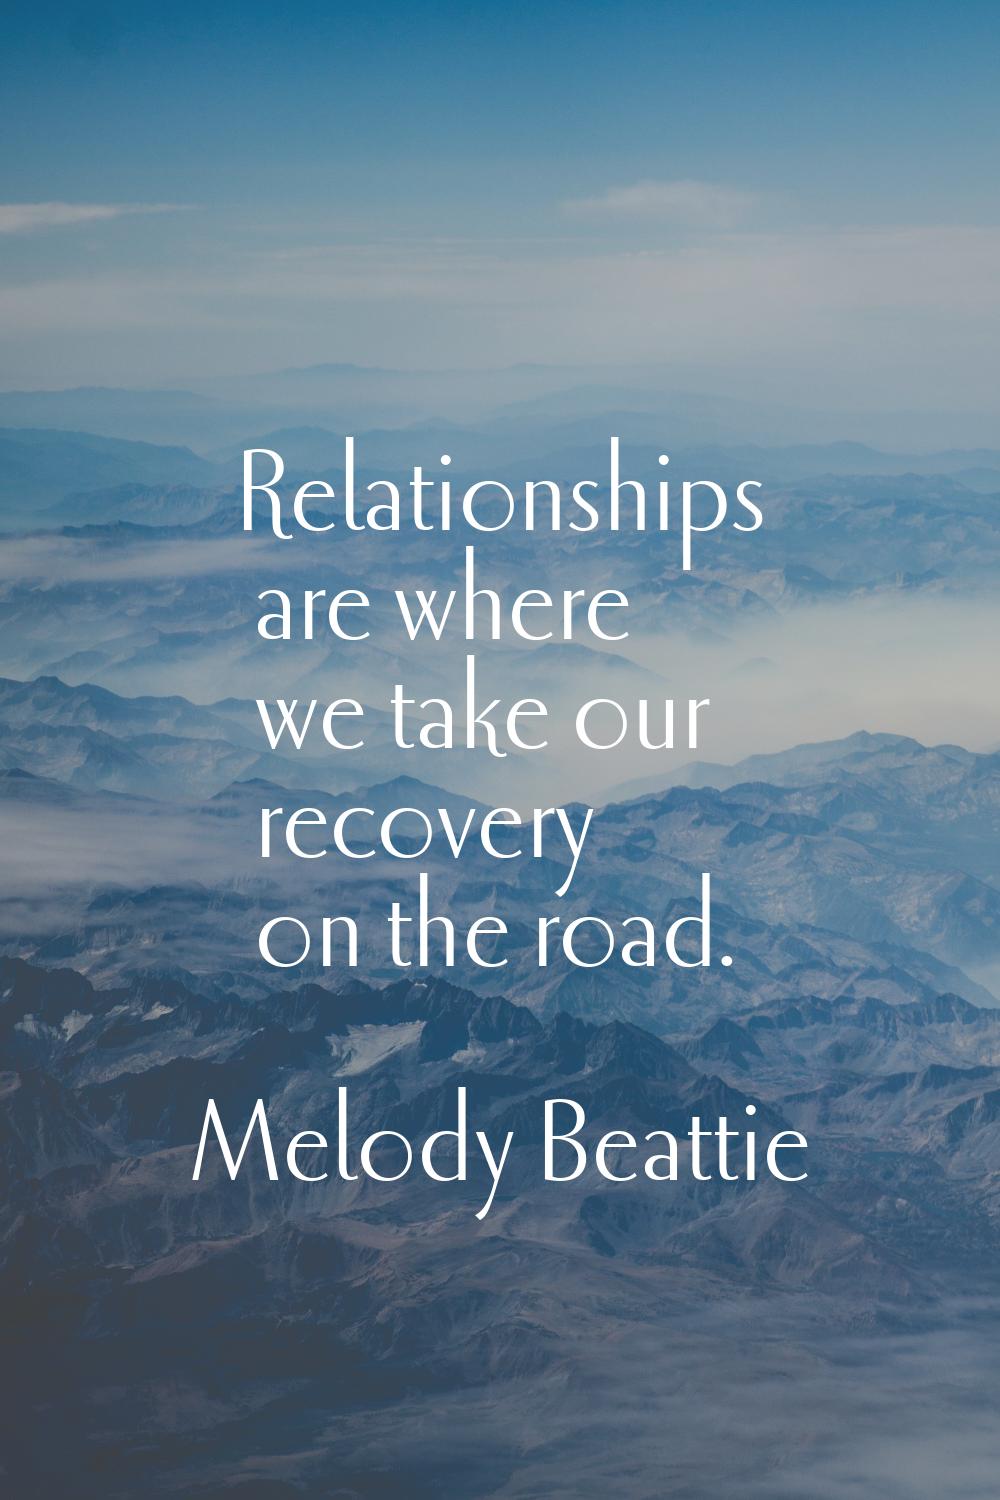 Relationships are where we take our recovery on the road.